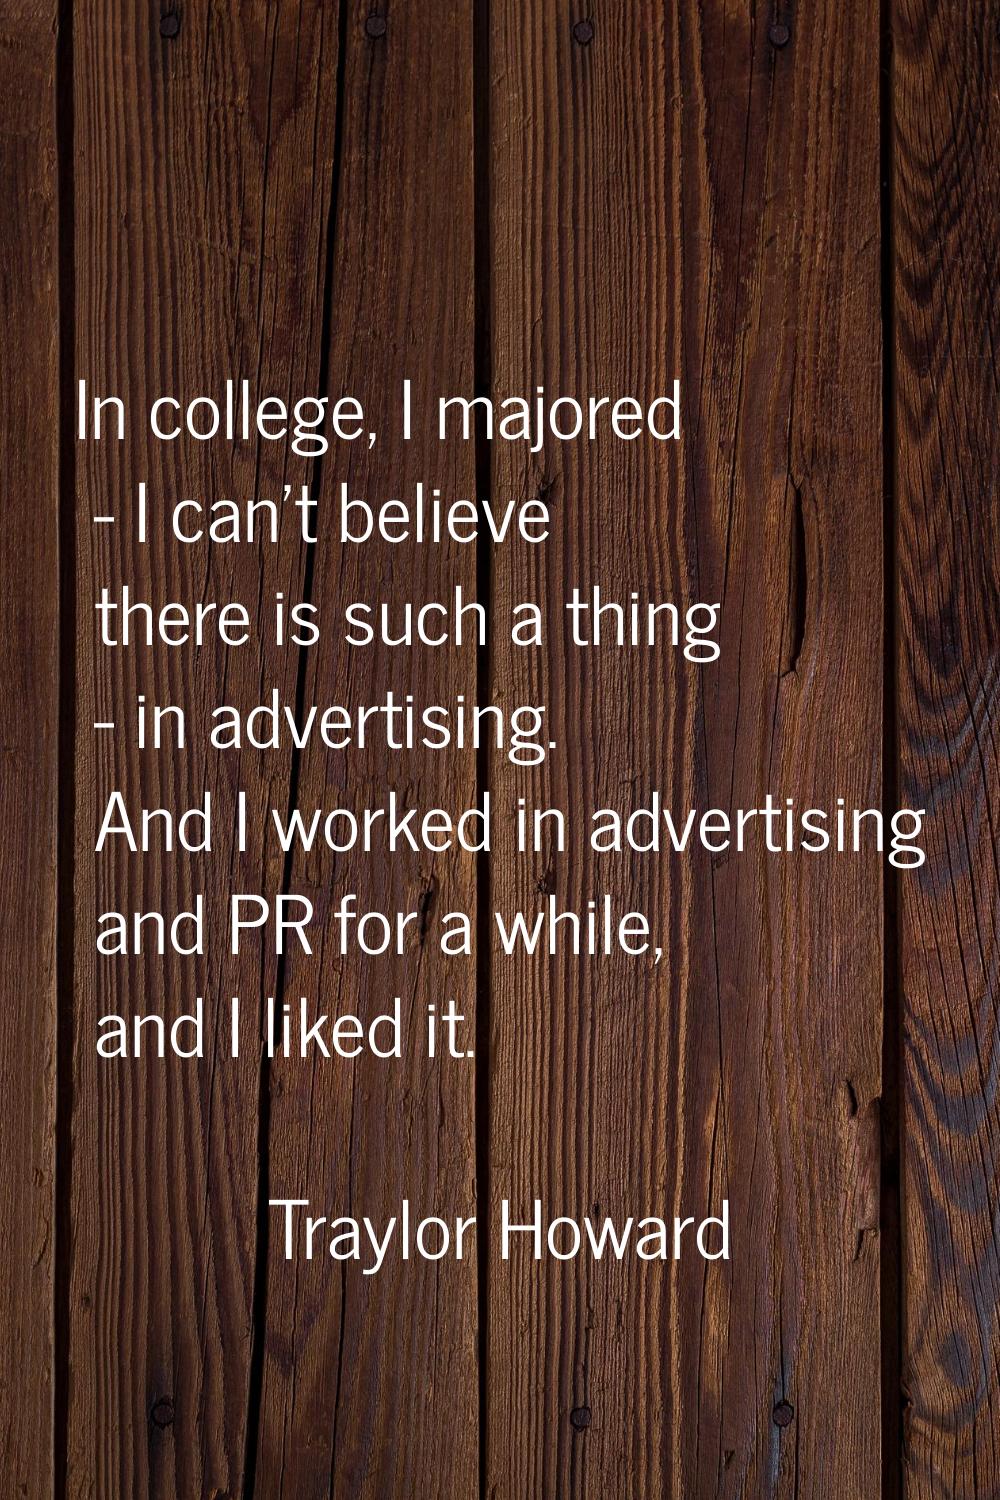 In college, I majored - I can't believe there is such a thing - in advertising. And I worked in adv